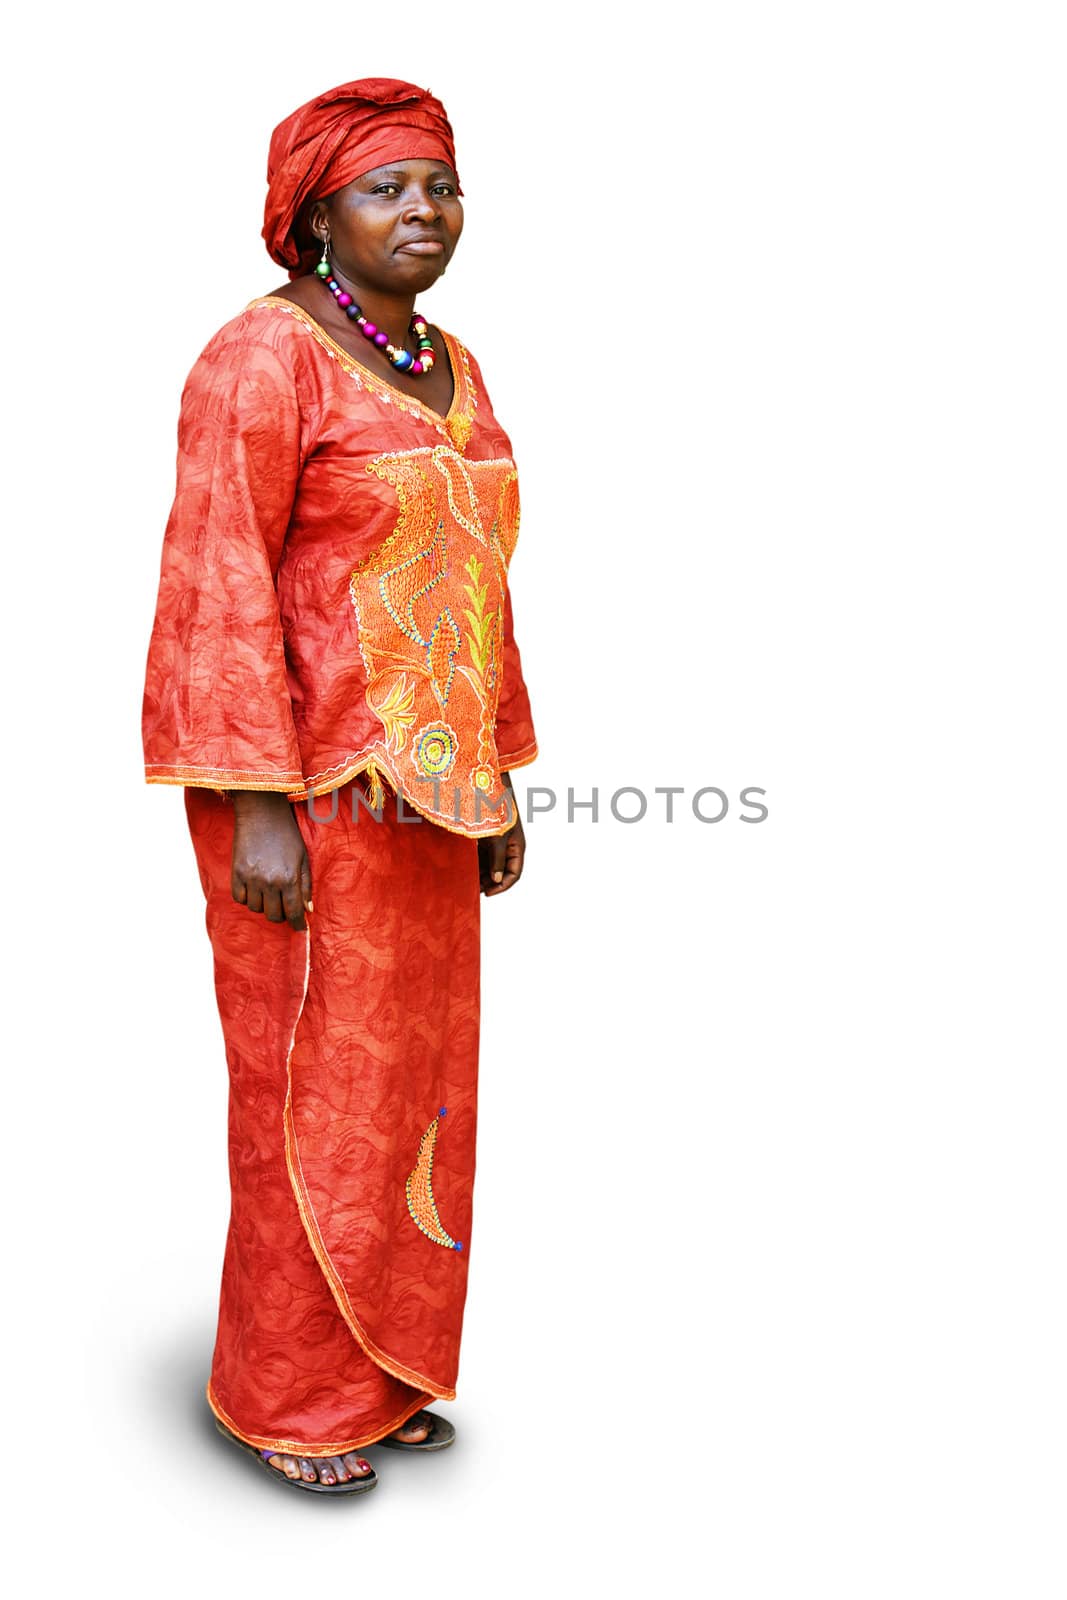 African woman in traditional clothing on white by Mirage3